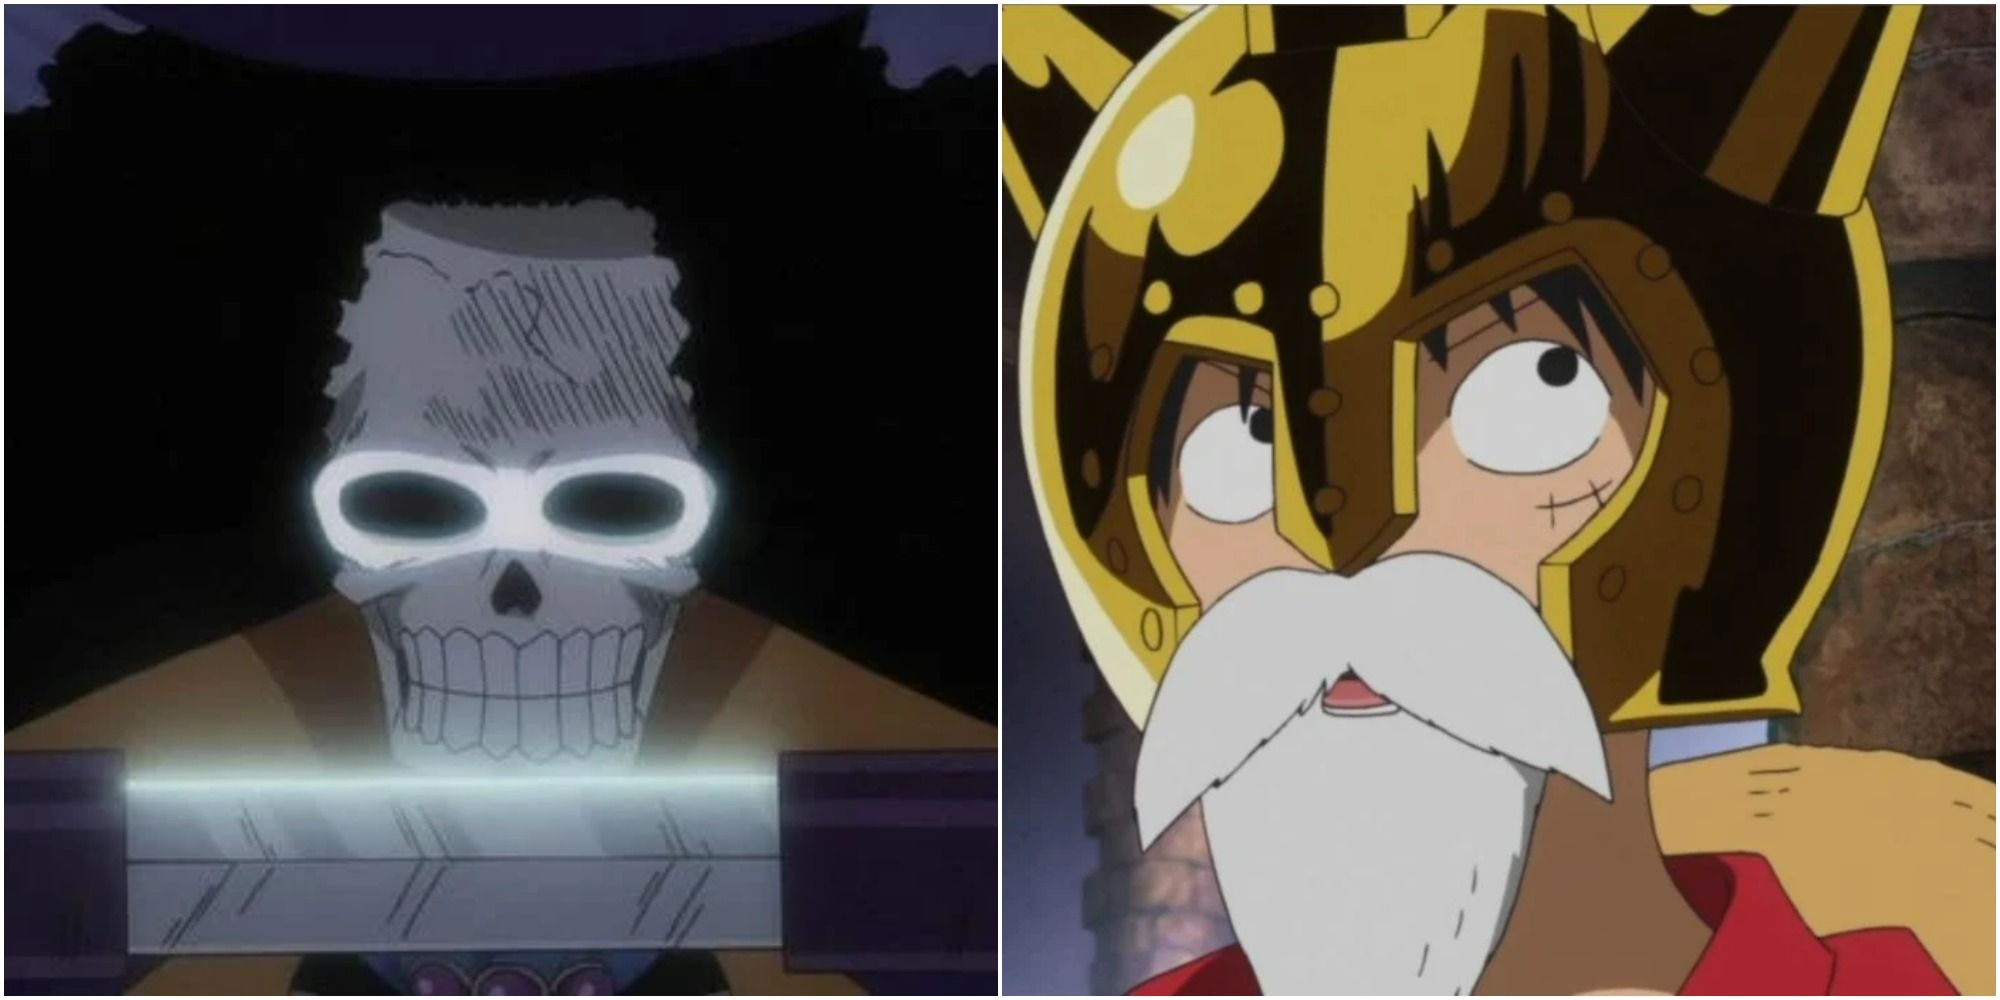 10 One Piece Characters That Only Serve As Plot Armor